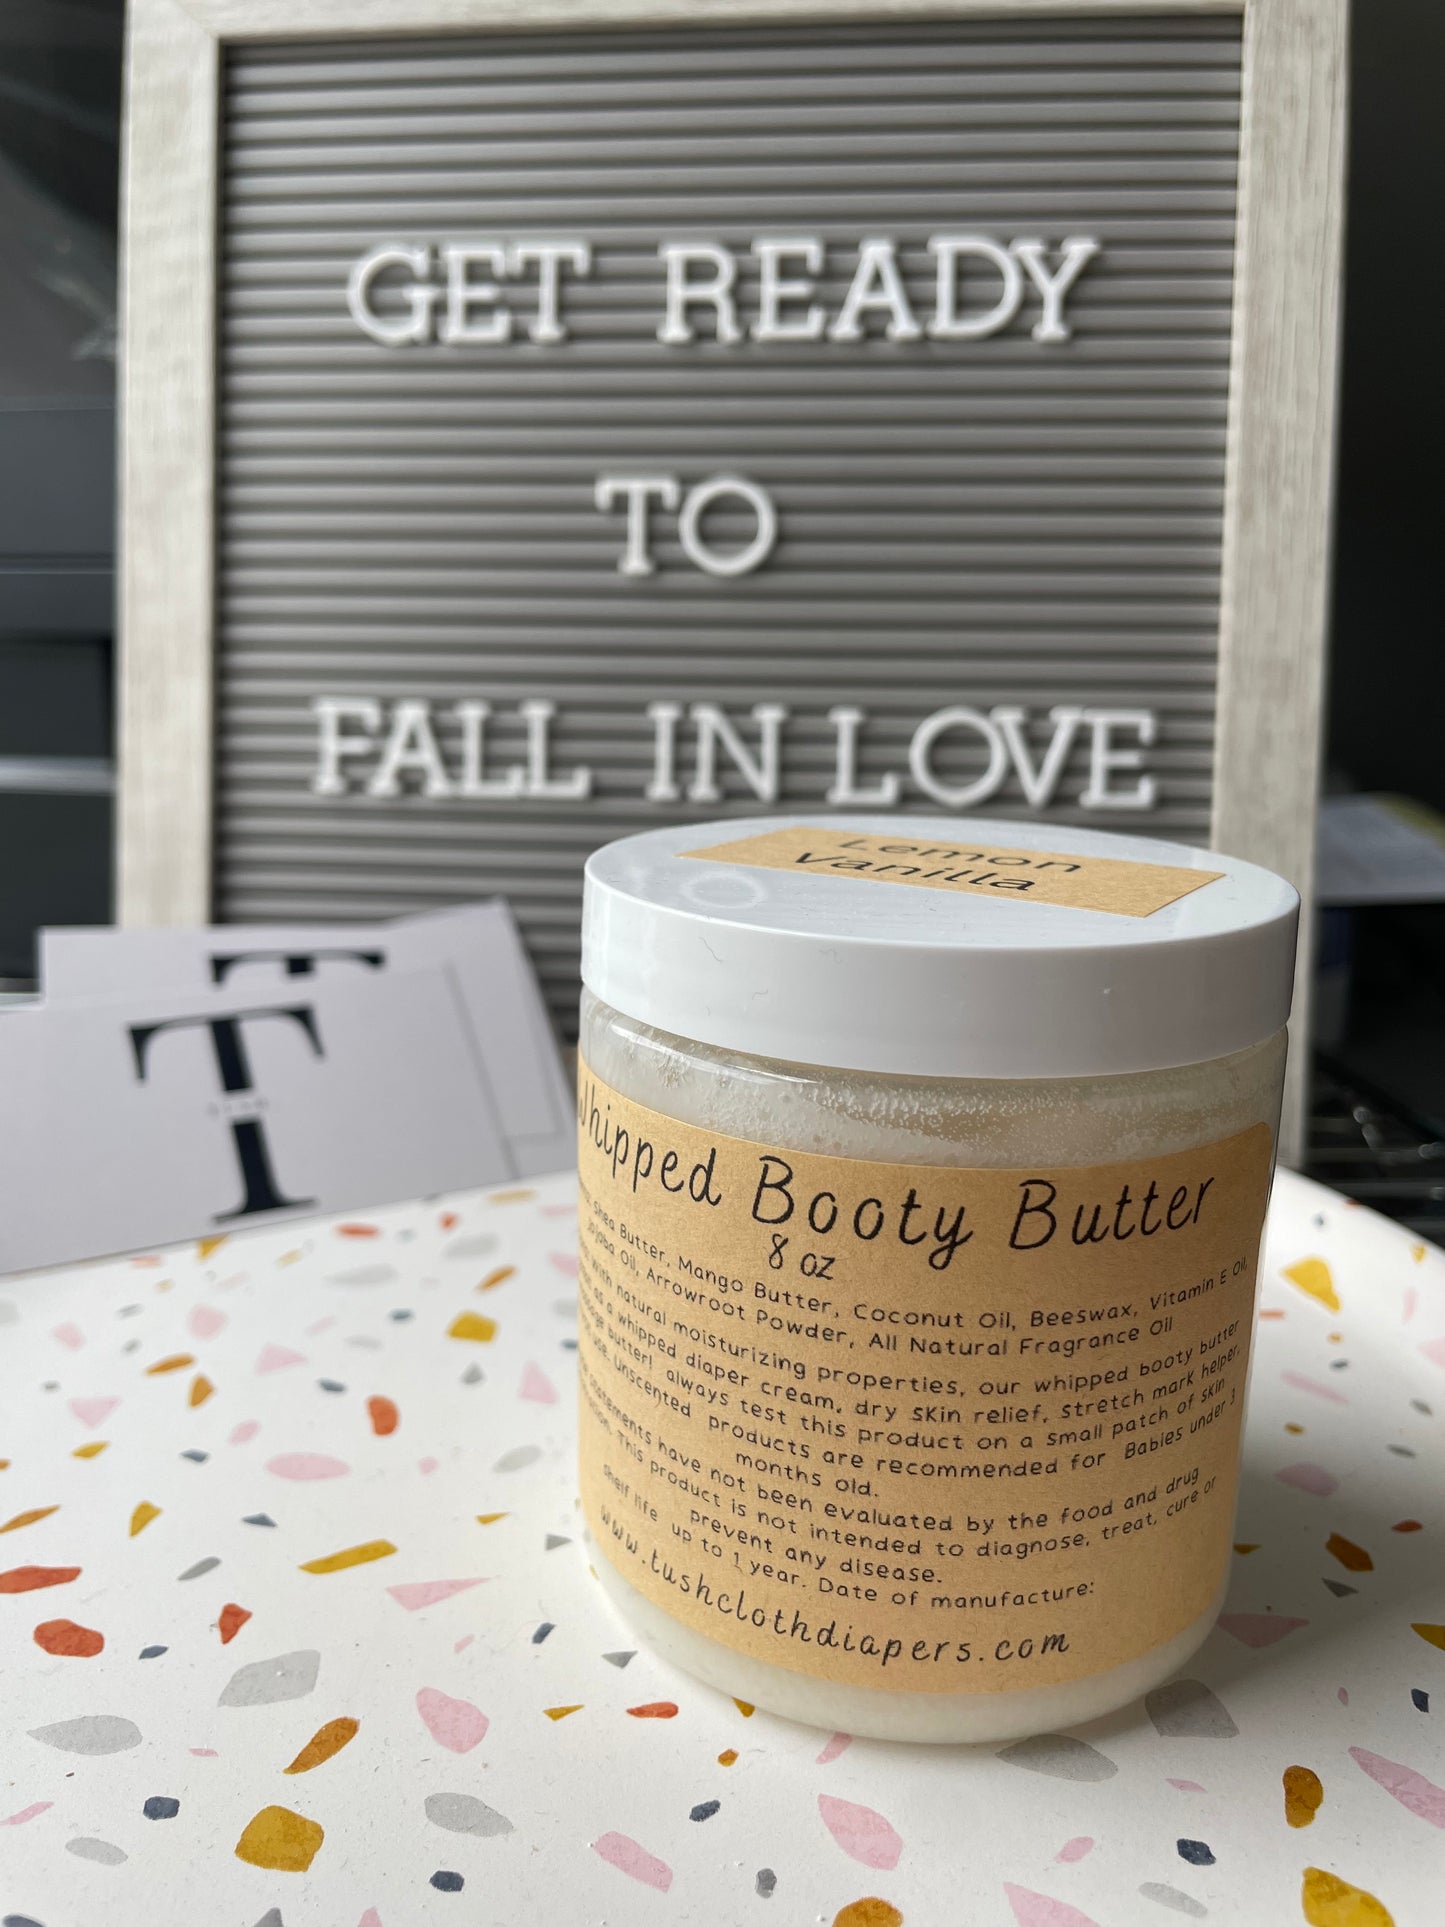 Whipped Booty Butter